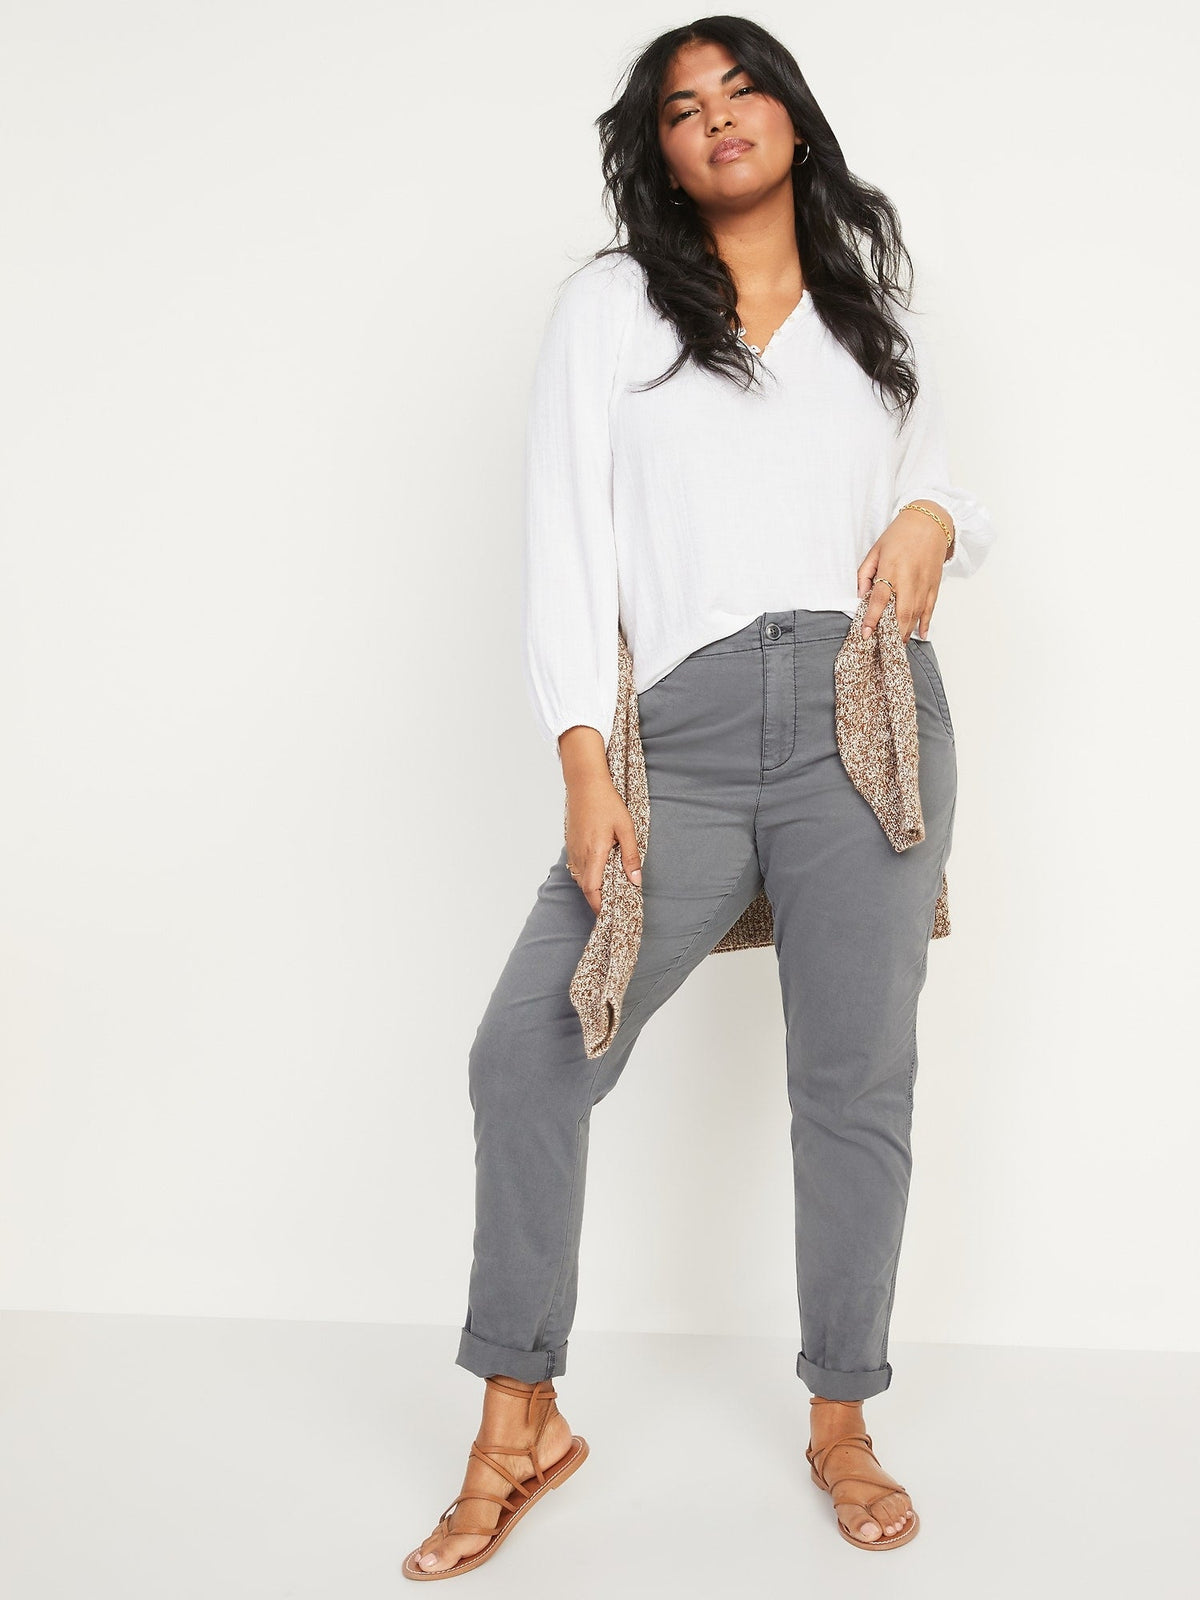 High-Waisted OGC Chino Pants for Women, Old Navy